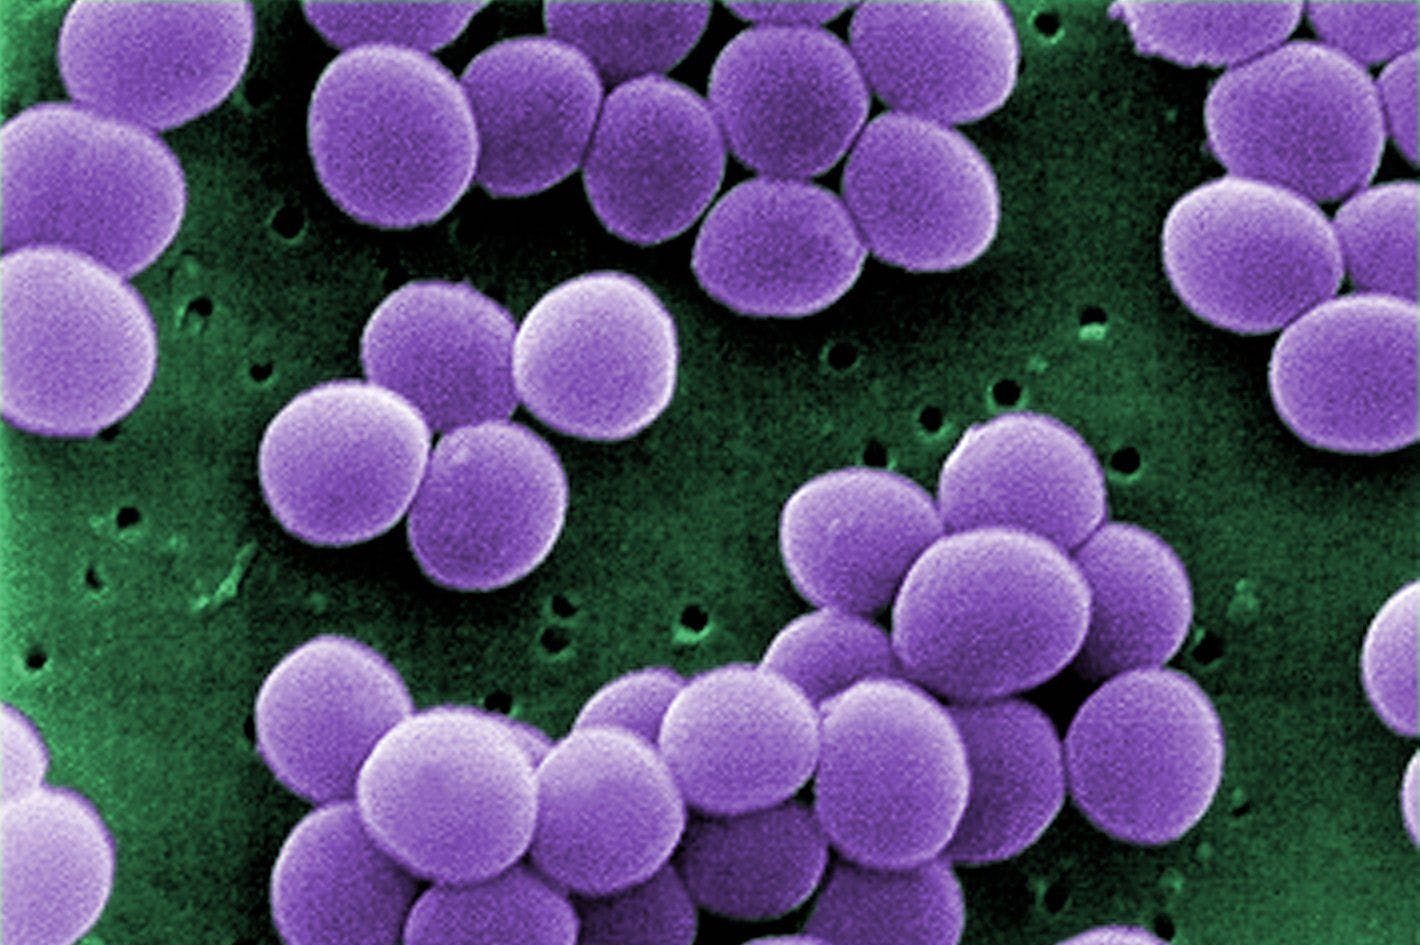 Staphylococcus aureus Bloodstream Infection Originating From the Urinary Tract: Characteristics and 30-day Mortality